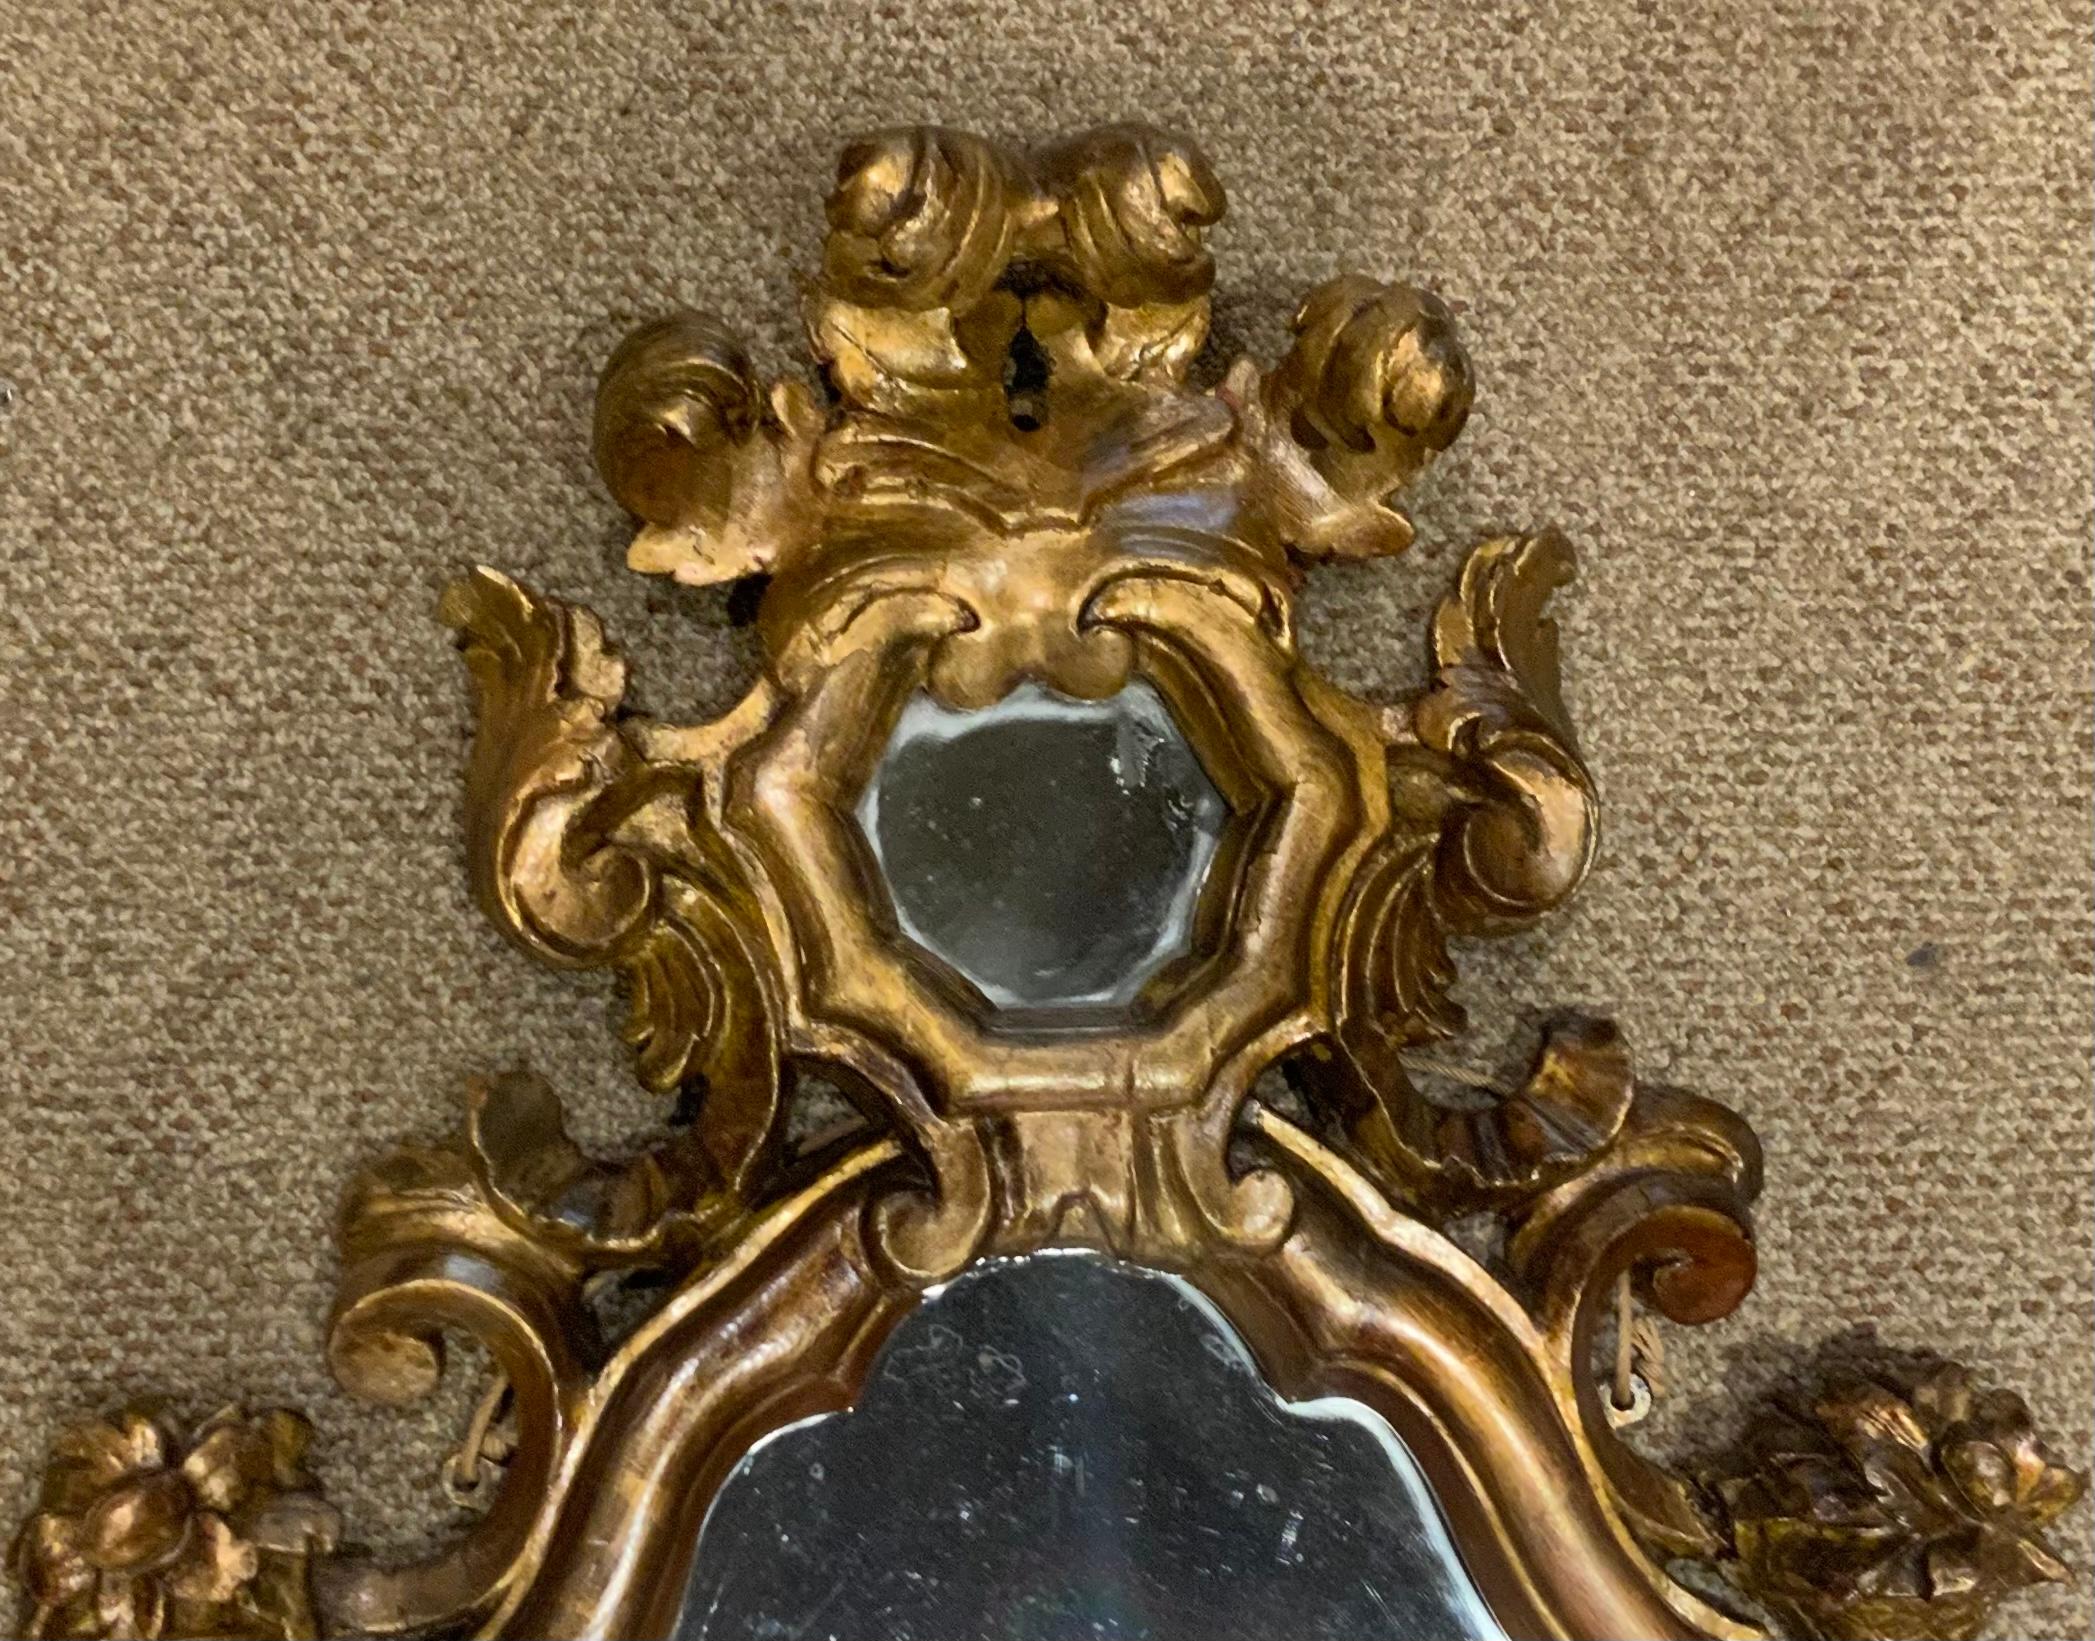 This pair is carved with floral motifs at the upper corners. The gilt
Wood has an aged patina in a soft gilt hue. The shaping is elongated
And the carving is exquisite with scrolls and flourishes throughout 
The mirror plate has no flaws or spots.